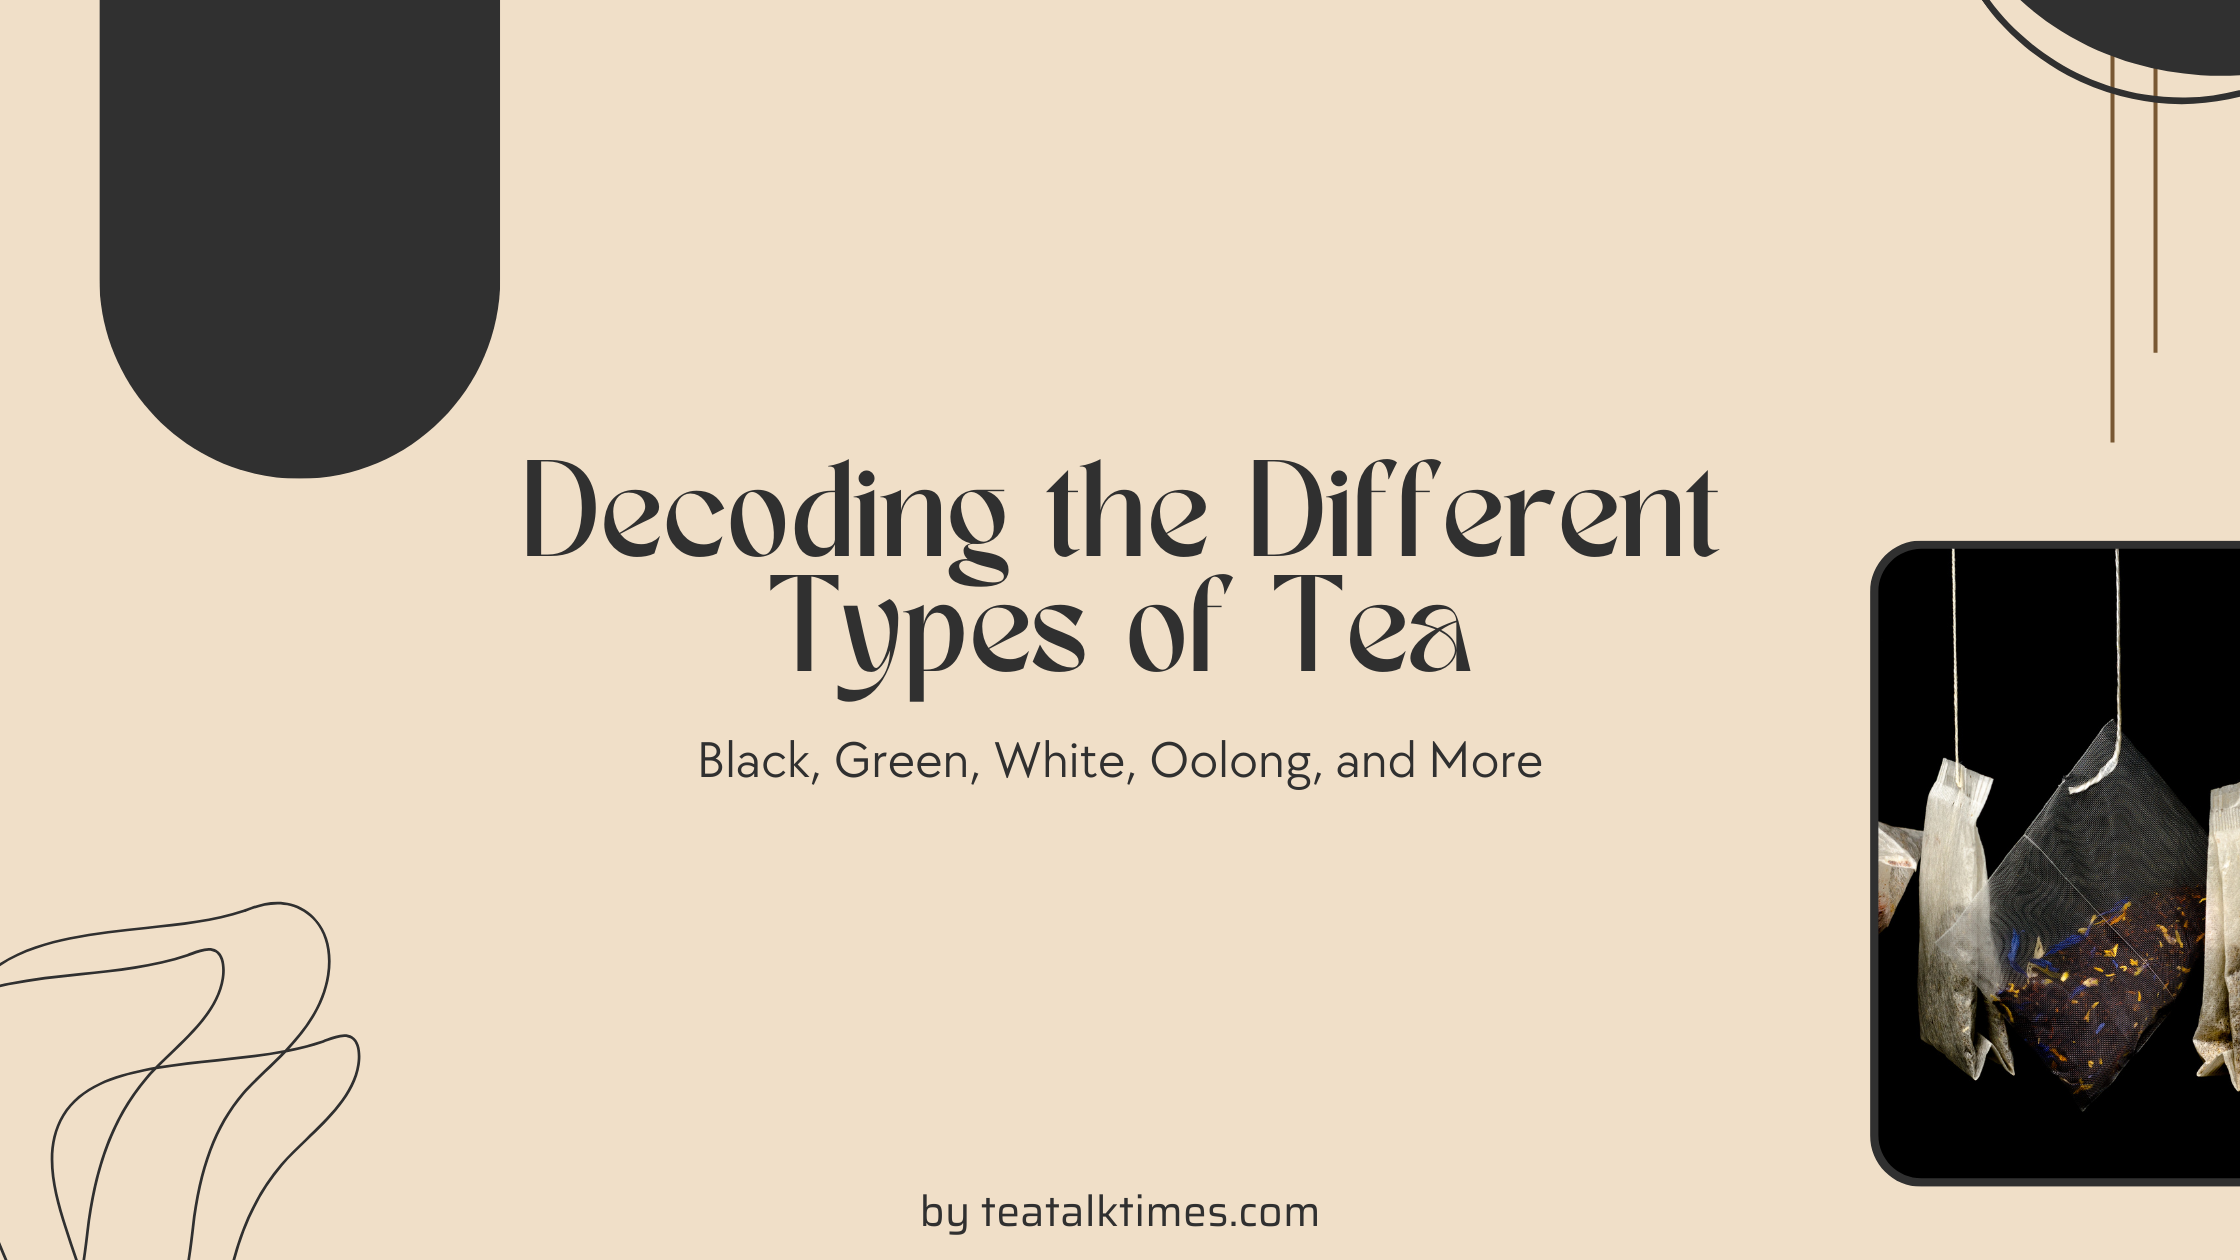 Decoding the Different Types of Tea: Black, Green, White, Oolong, and More